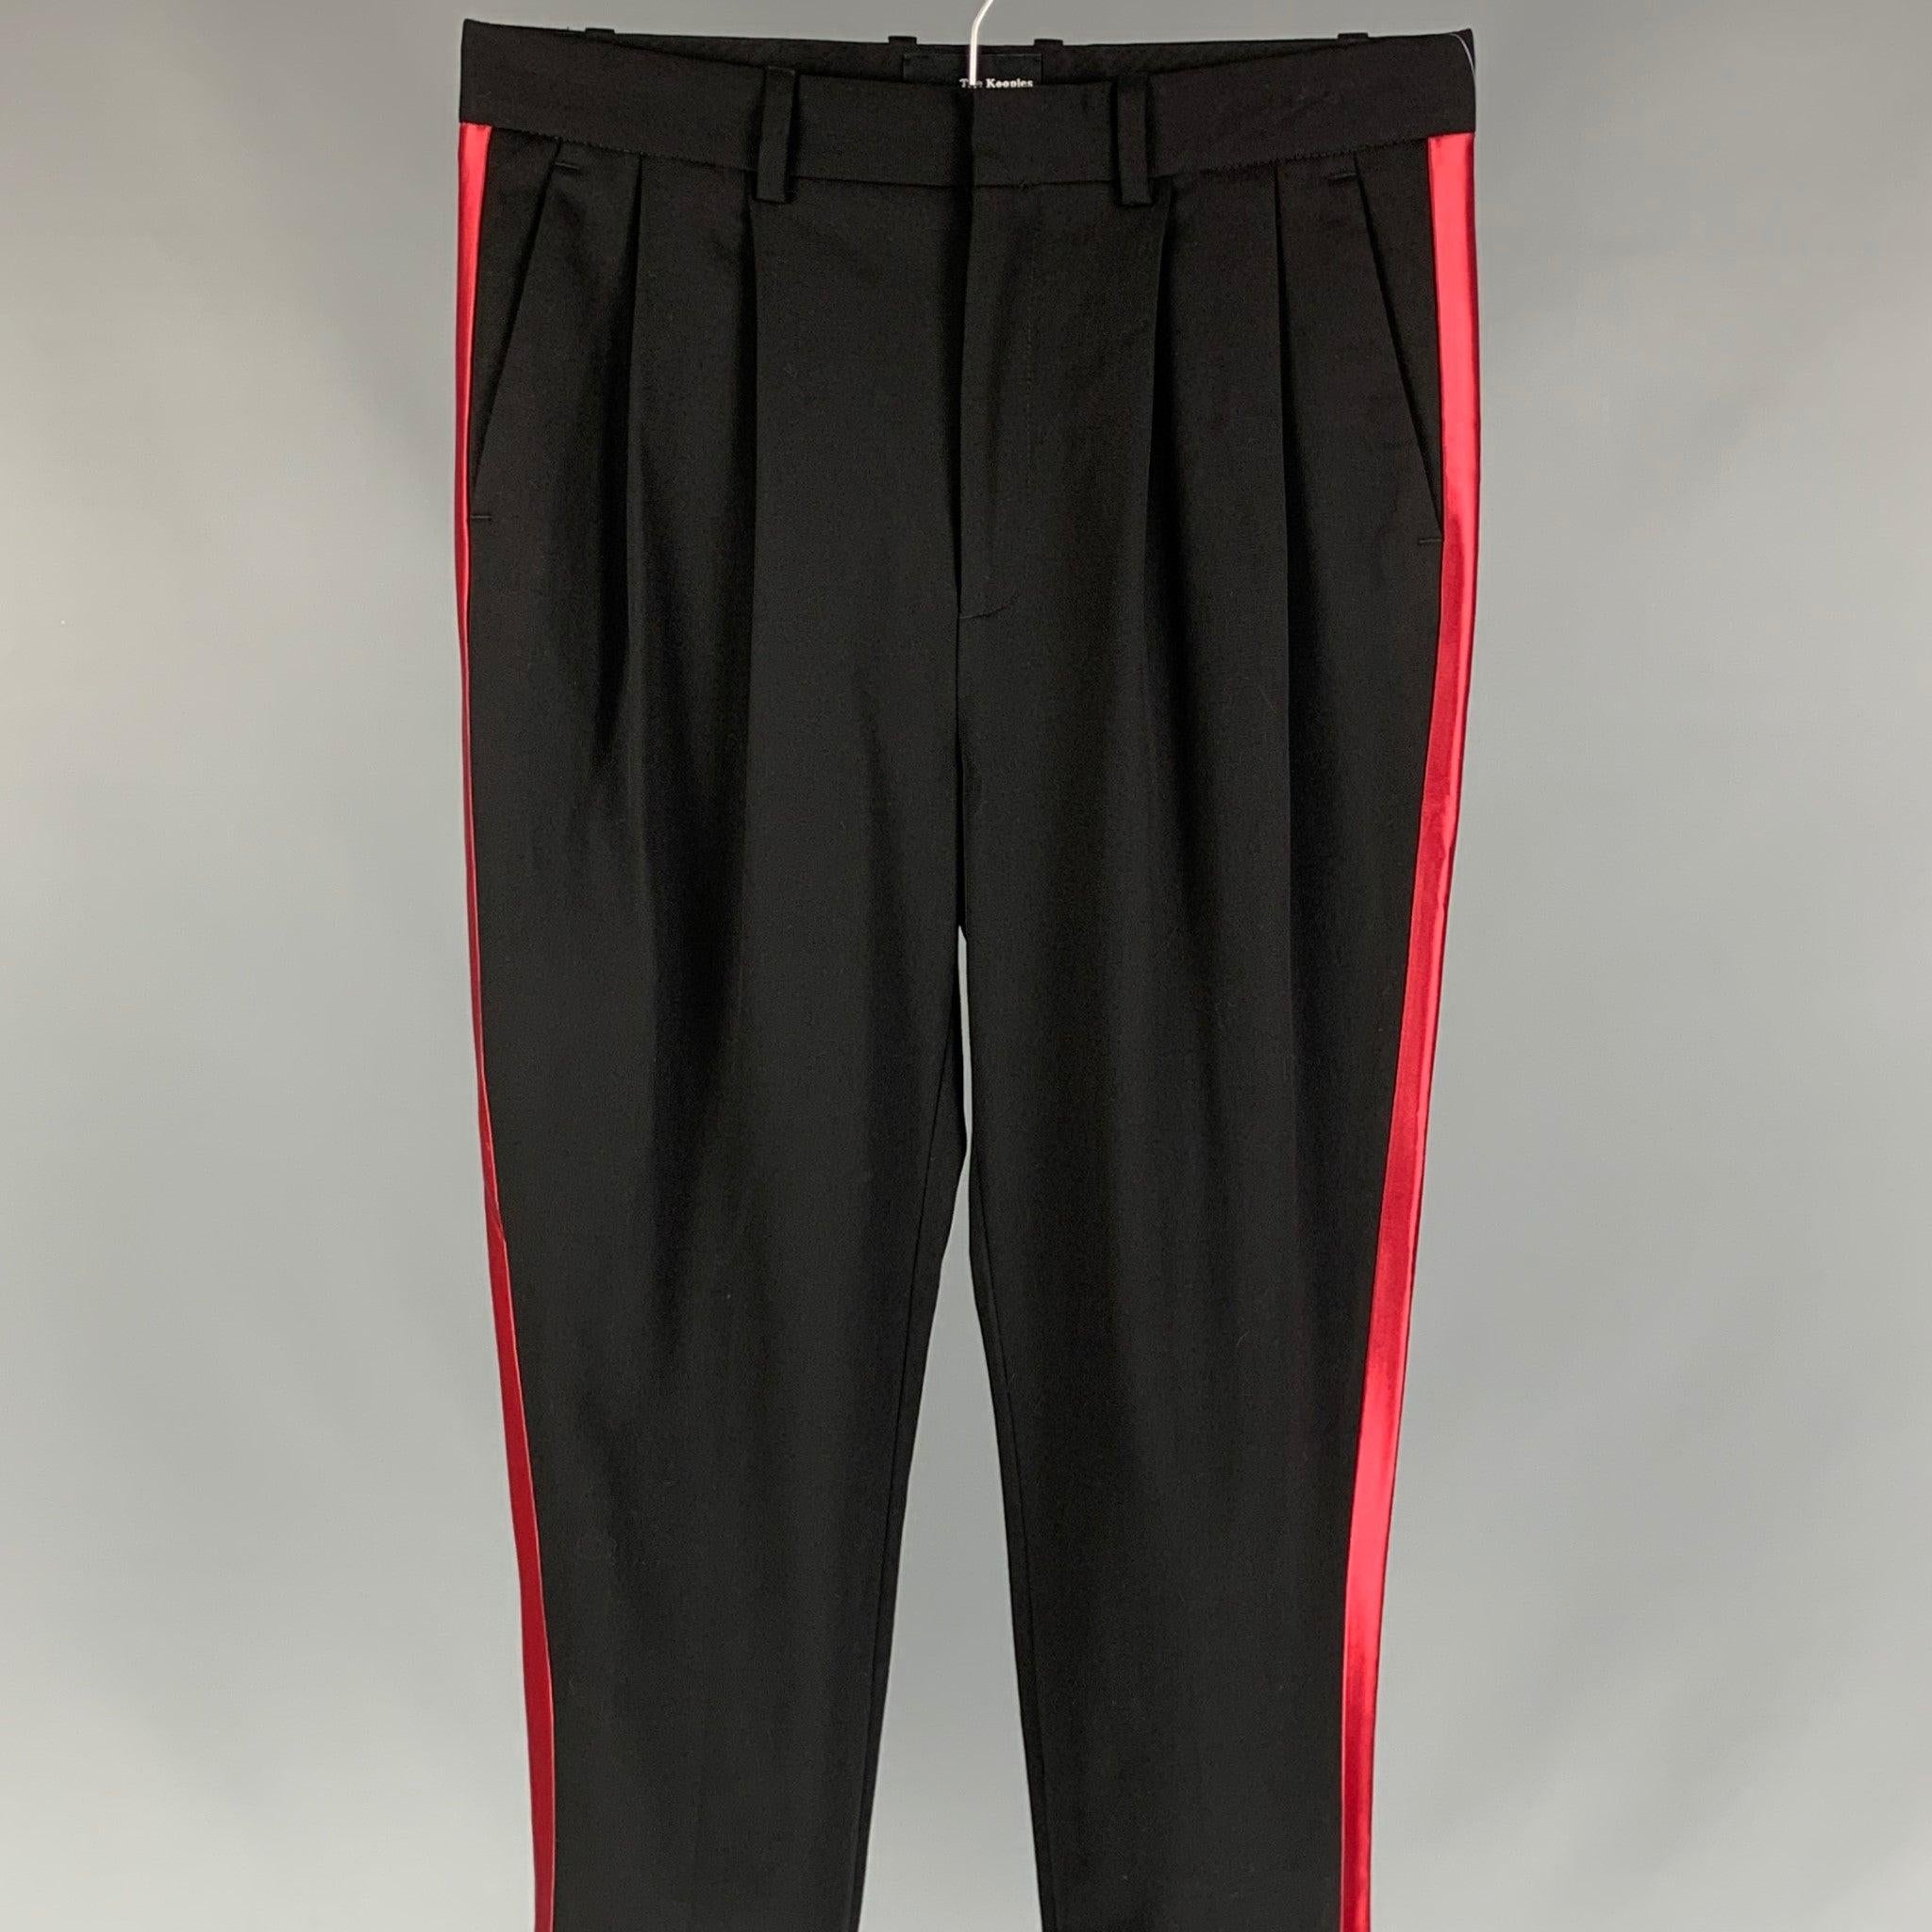 THE KOOPLES tuxedo dress pants comes in black & red wool featuring a pleated style, slim fit, and a zip fly closure.
Very Good
Pre-Owned Condition. 

Marked:   Size tag removed.  

Measurements: 
  Waist: 31 inches  Rise: 11.5 inches  Inseam: 30